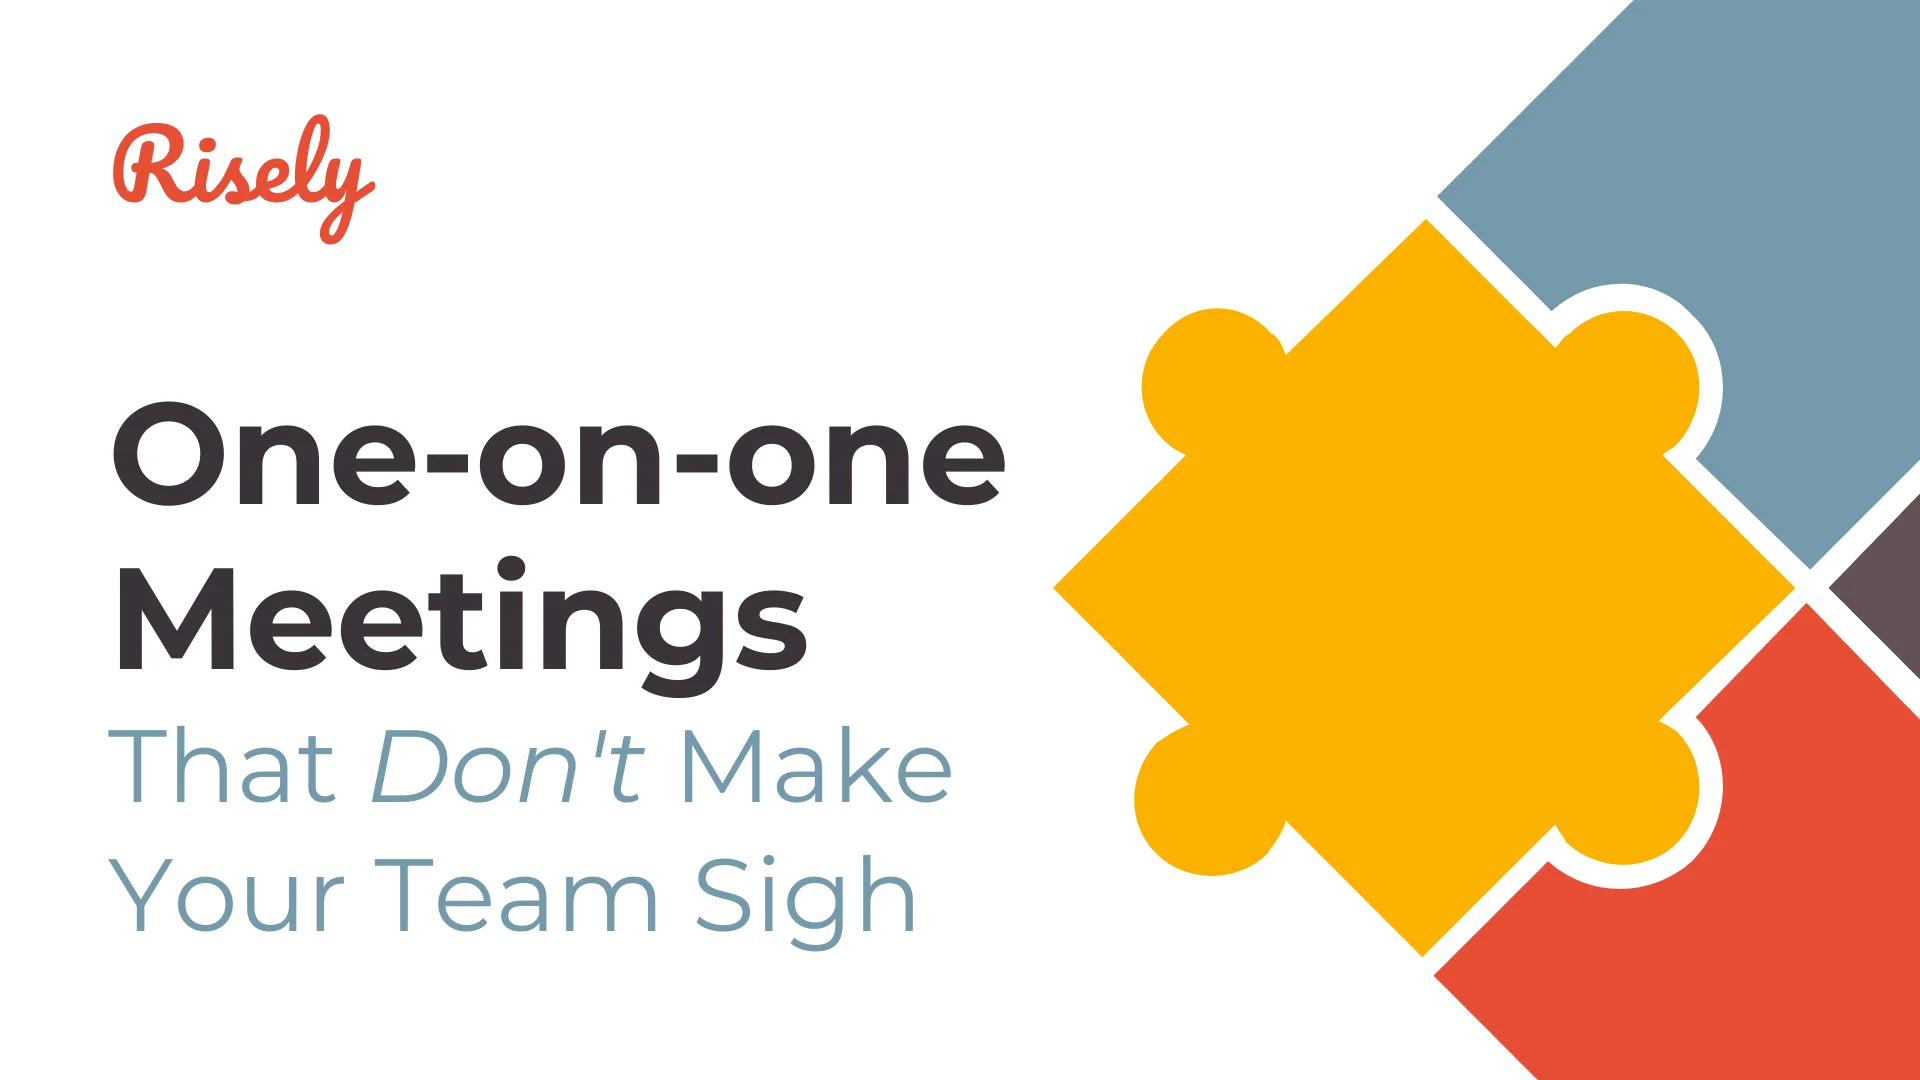 One-on-one Meetings That Don’t Make Your Team Sigh